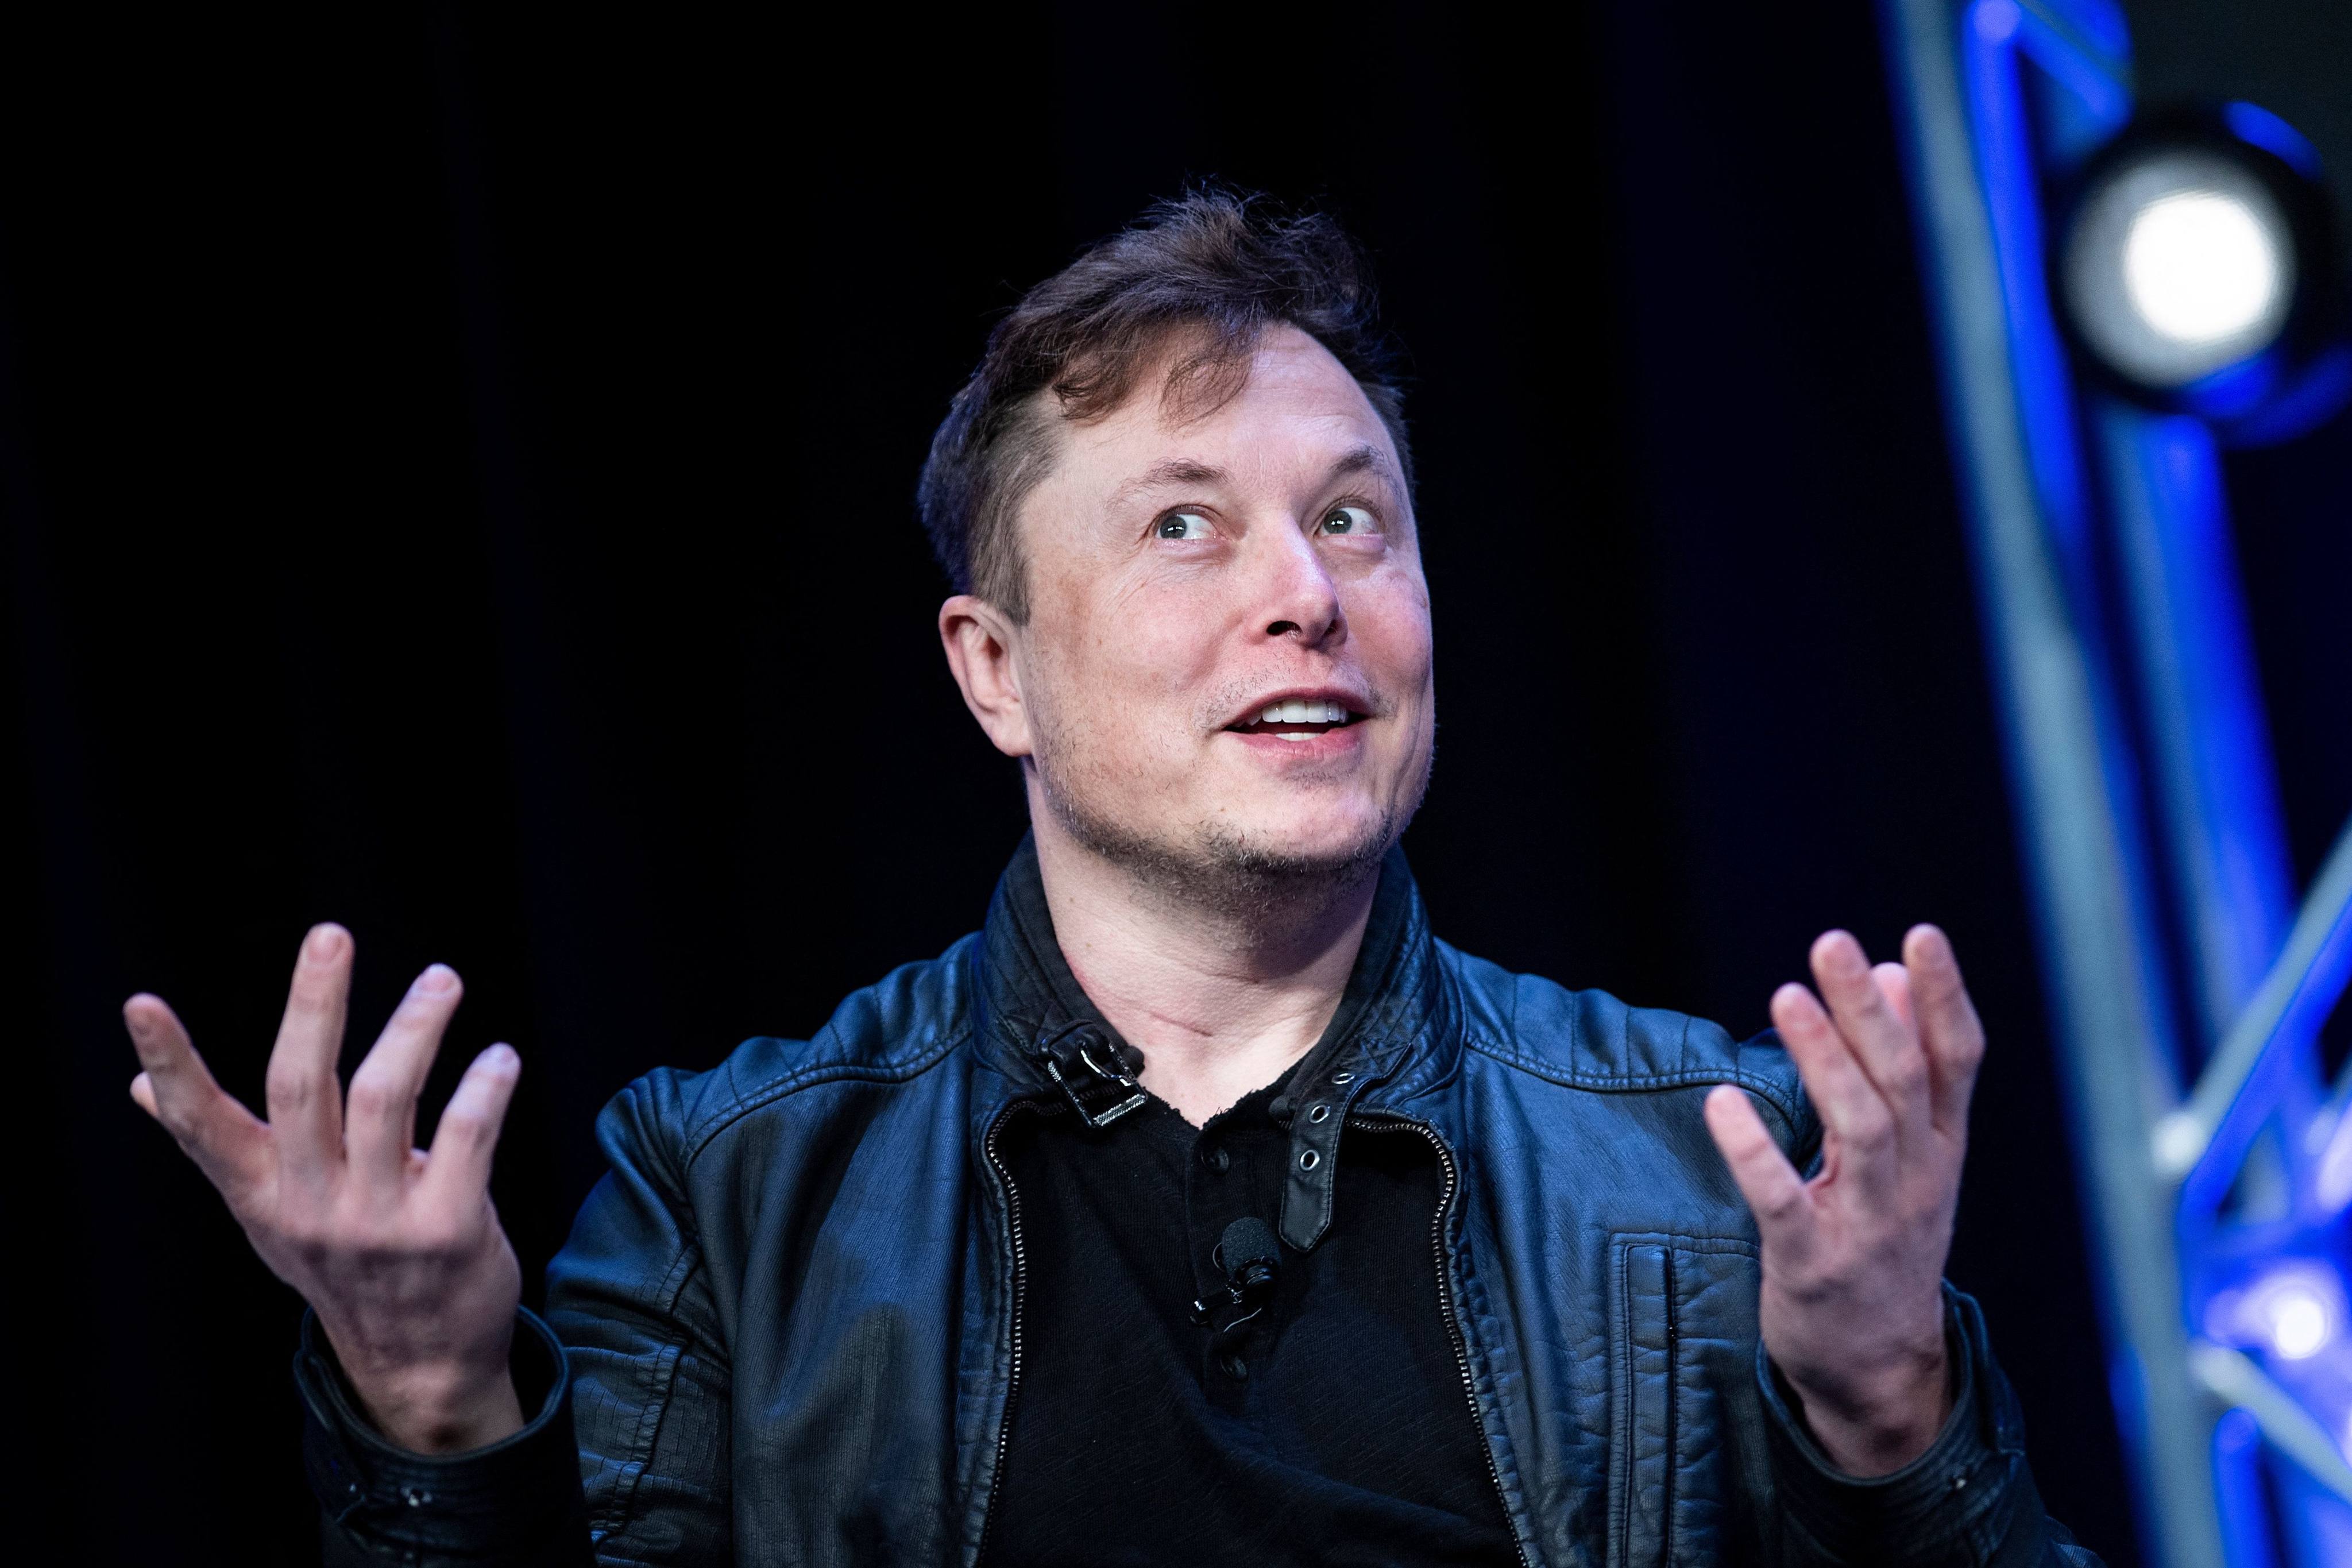 Unlike the present day, businesspeople such as Elon Musk (pictured), Jeff Bezos and Bill Gates were held in contempt in ancient Chinese society. Photo: AFP